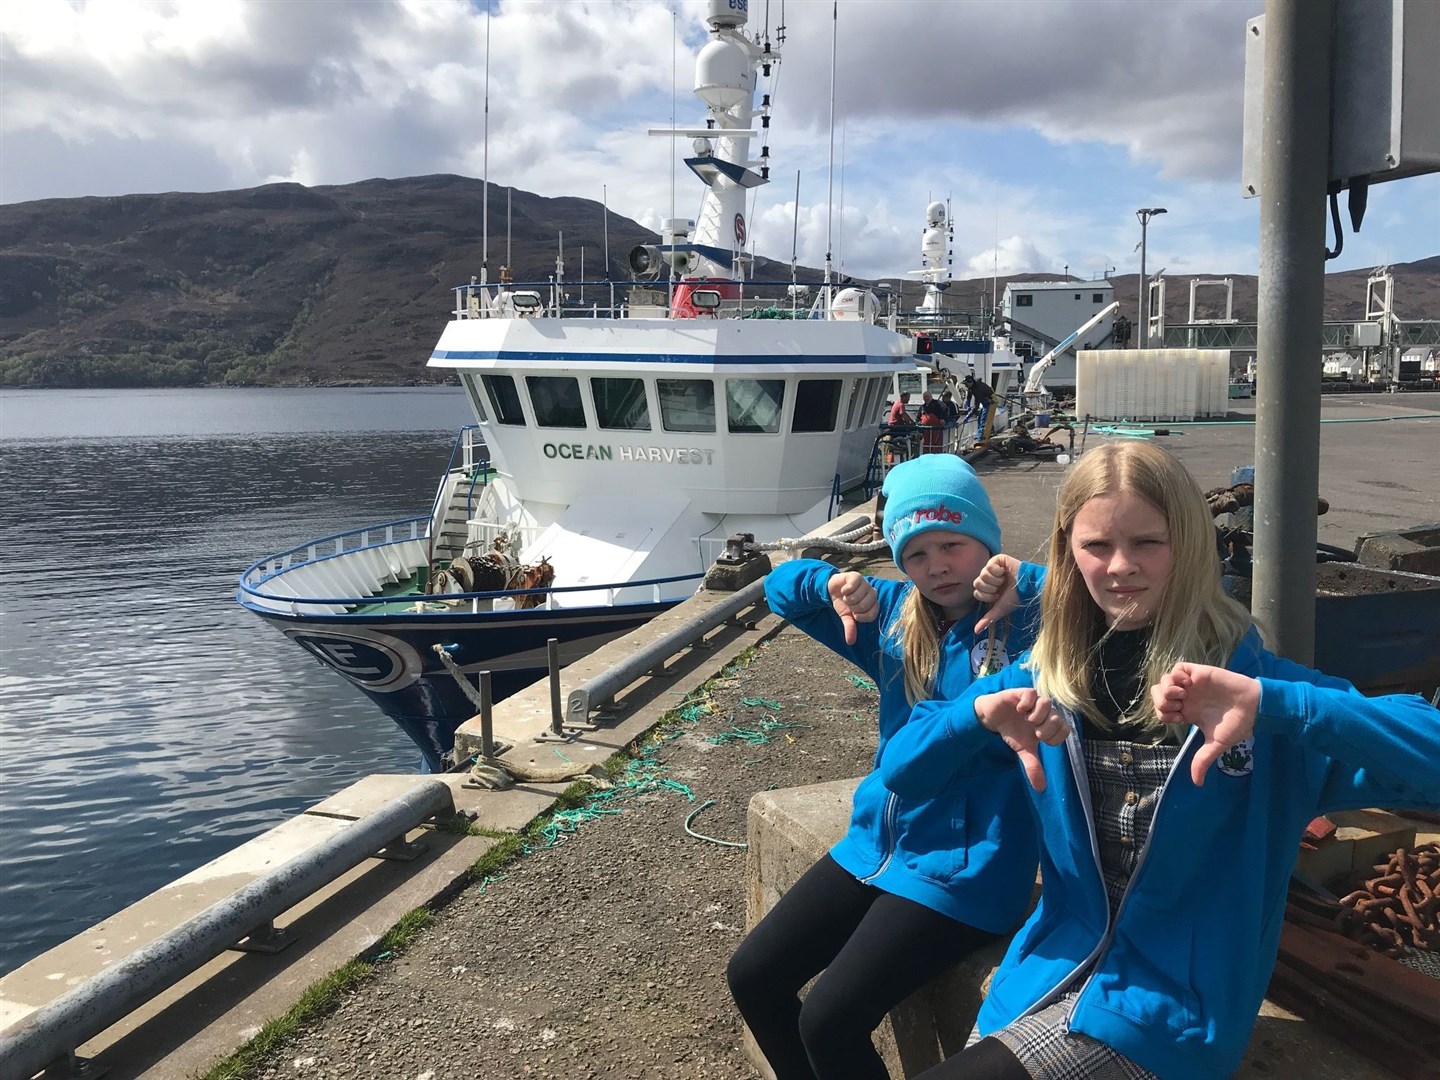 Ullapool Sea Savers were unimpressed with the turn of events but secured a sincere apology from the skipper of the Ocean Harvester who has invited them aboard when it is safe to do so.